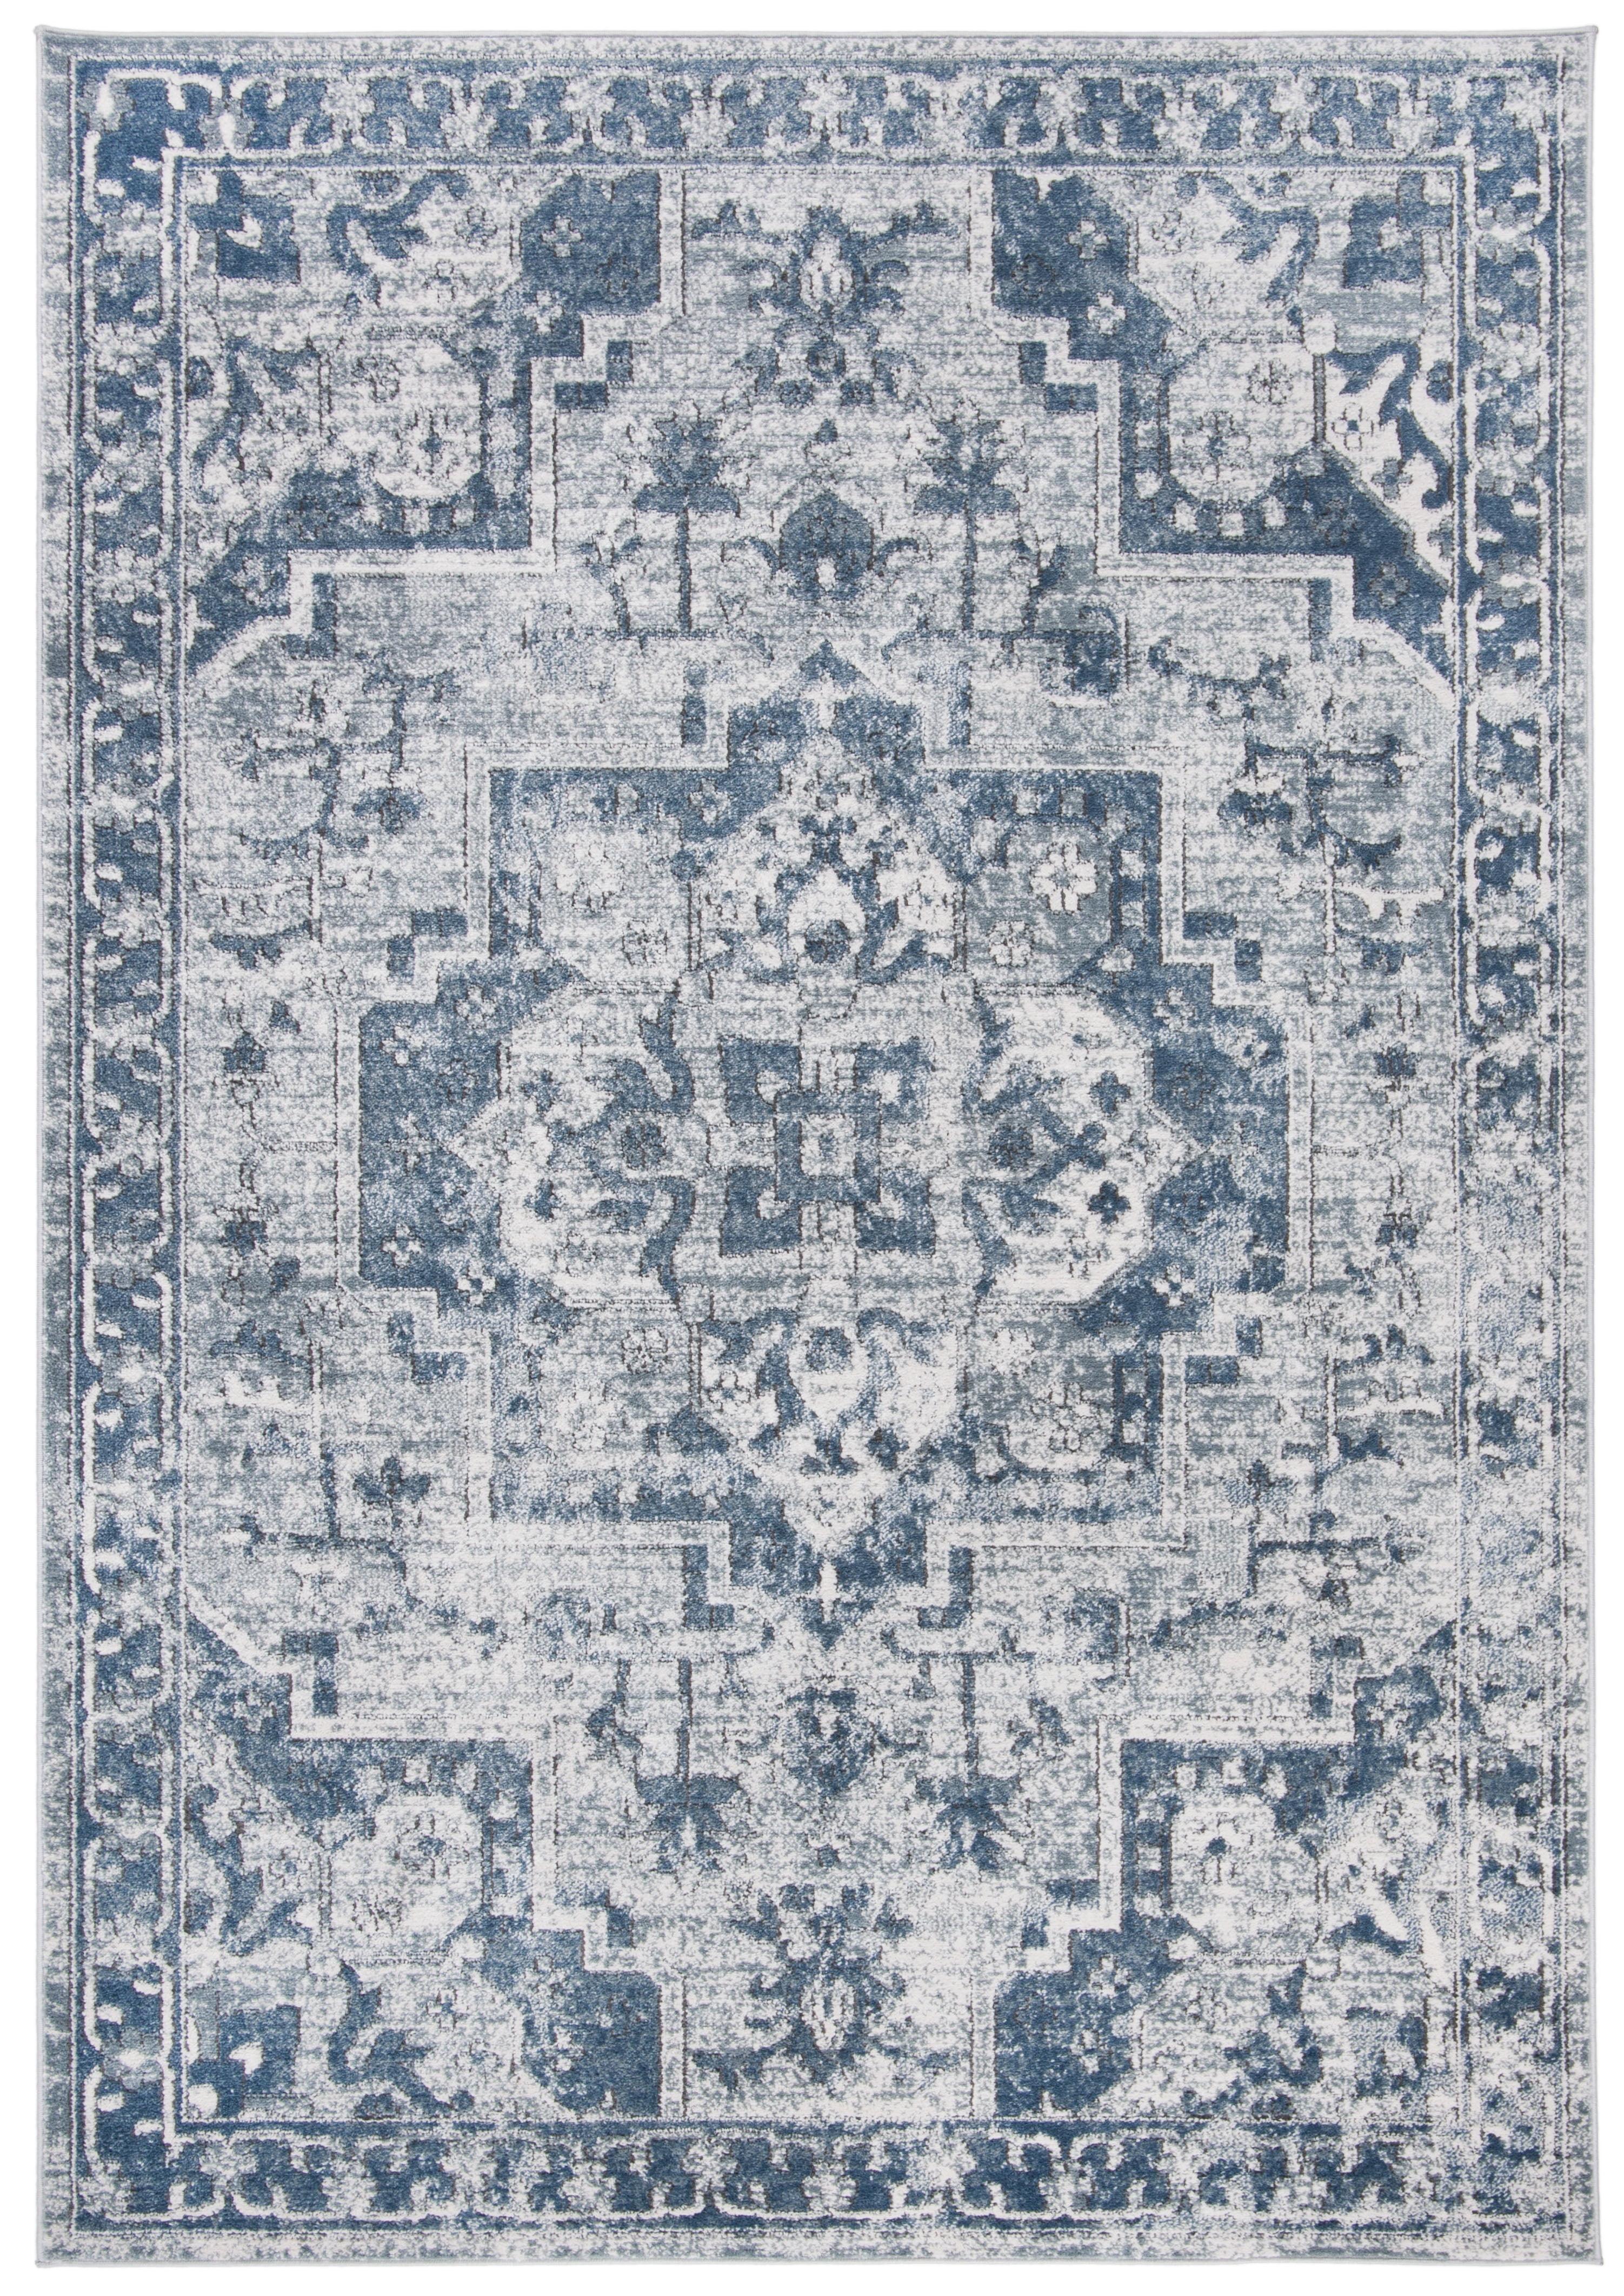 Ivory and Navy Hand-Tufted Wool-Silk Blend 4' x 6' Area Rug